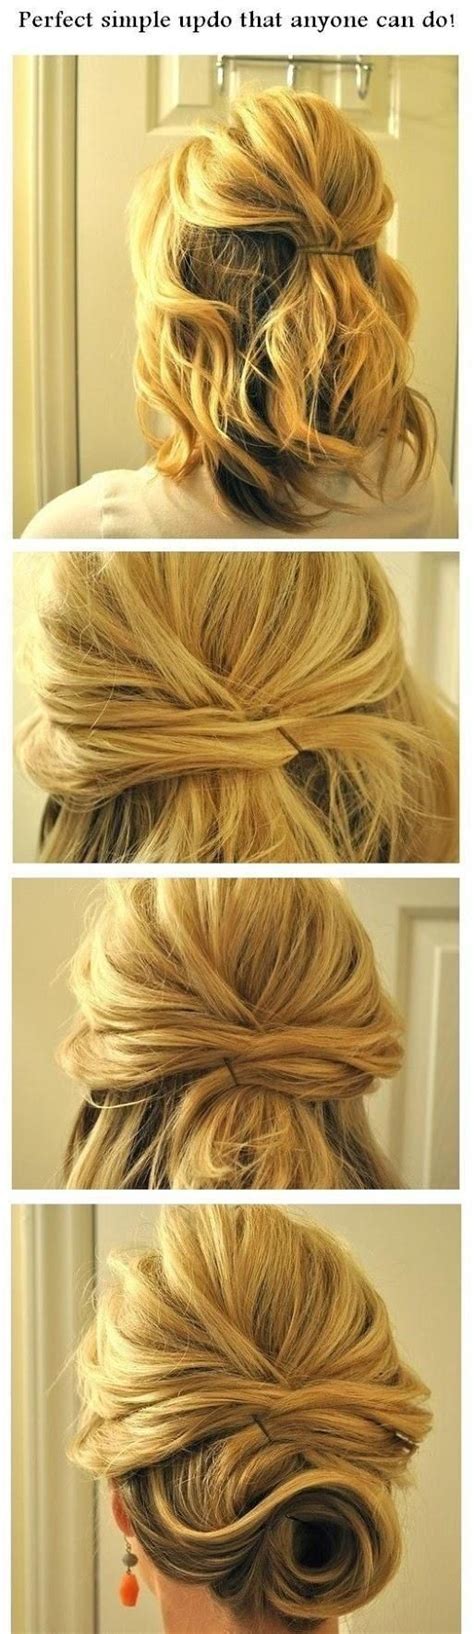 12 short updo hairstyles ideas anyone can do popular haircuts